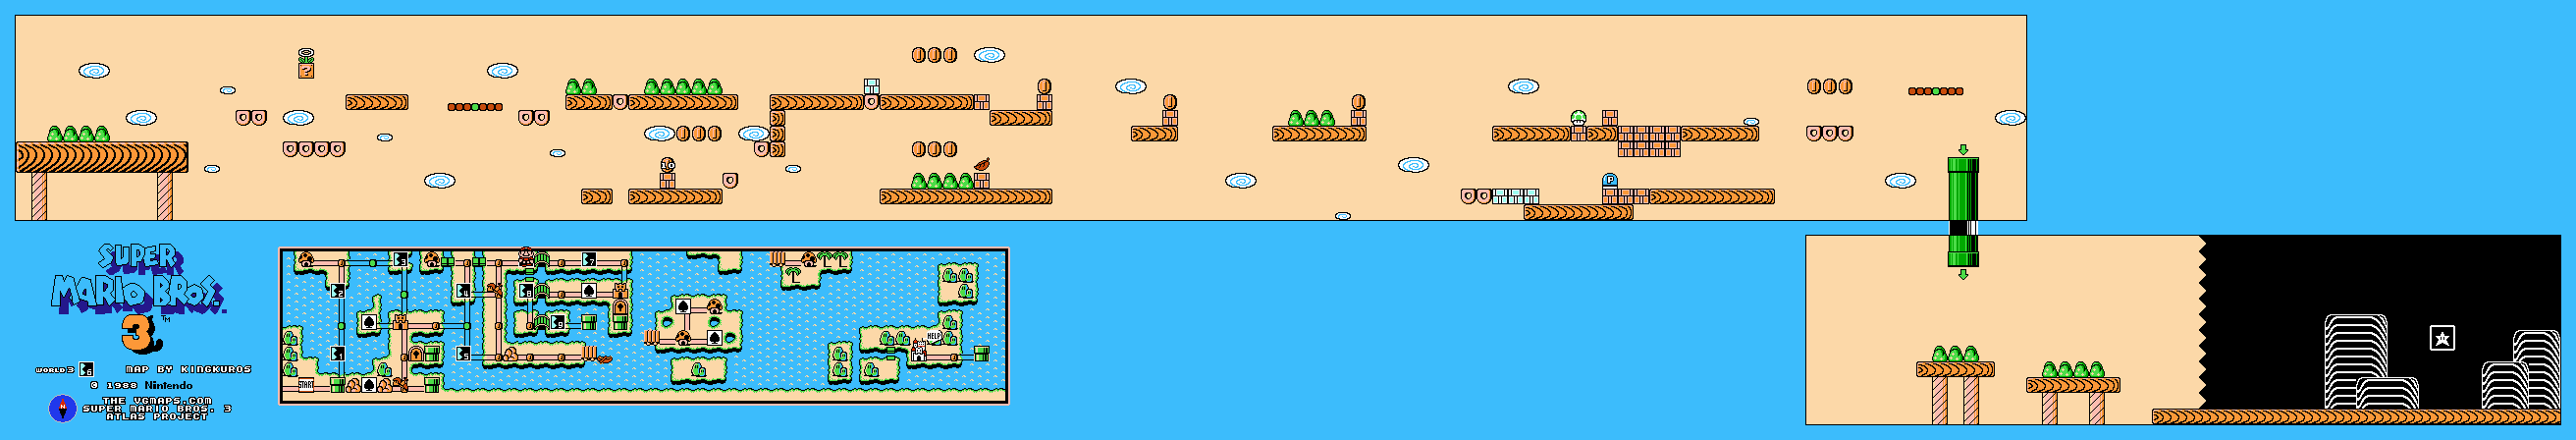 Layout in the NES version